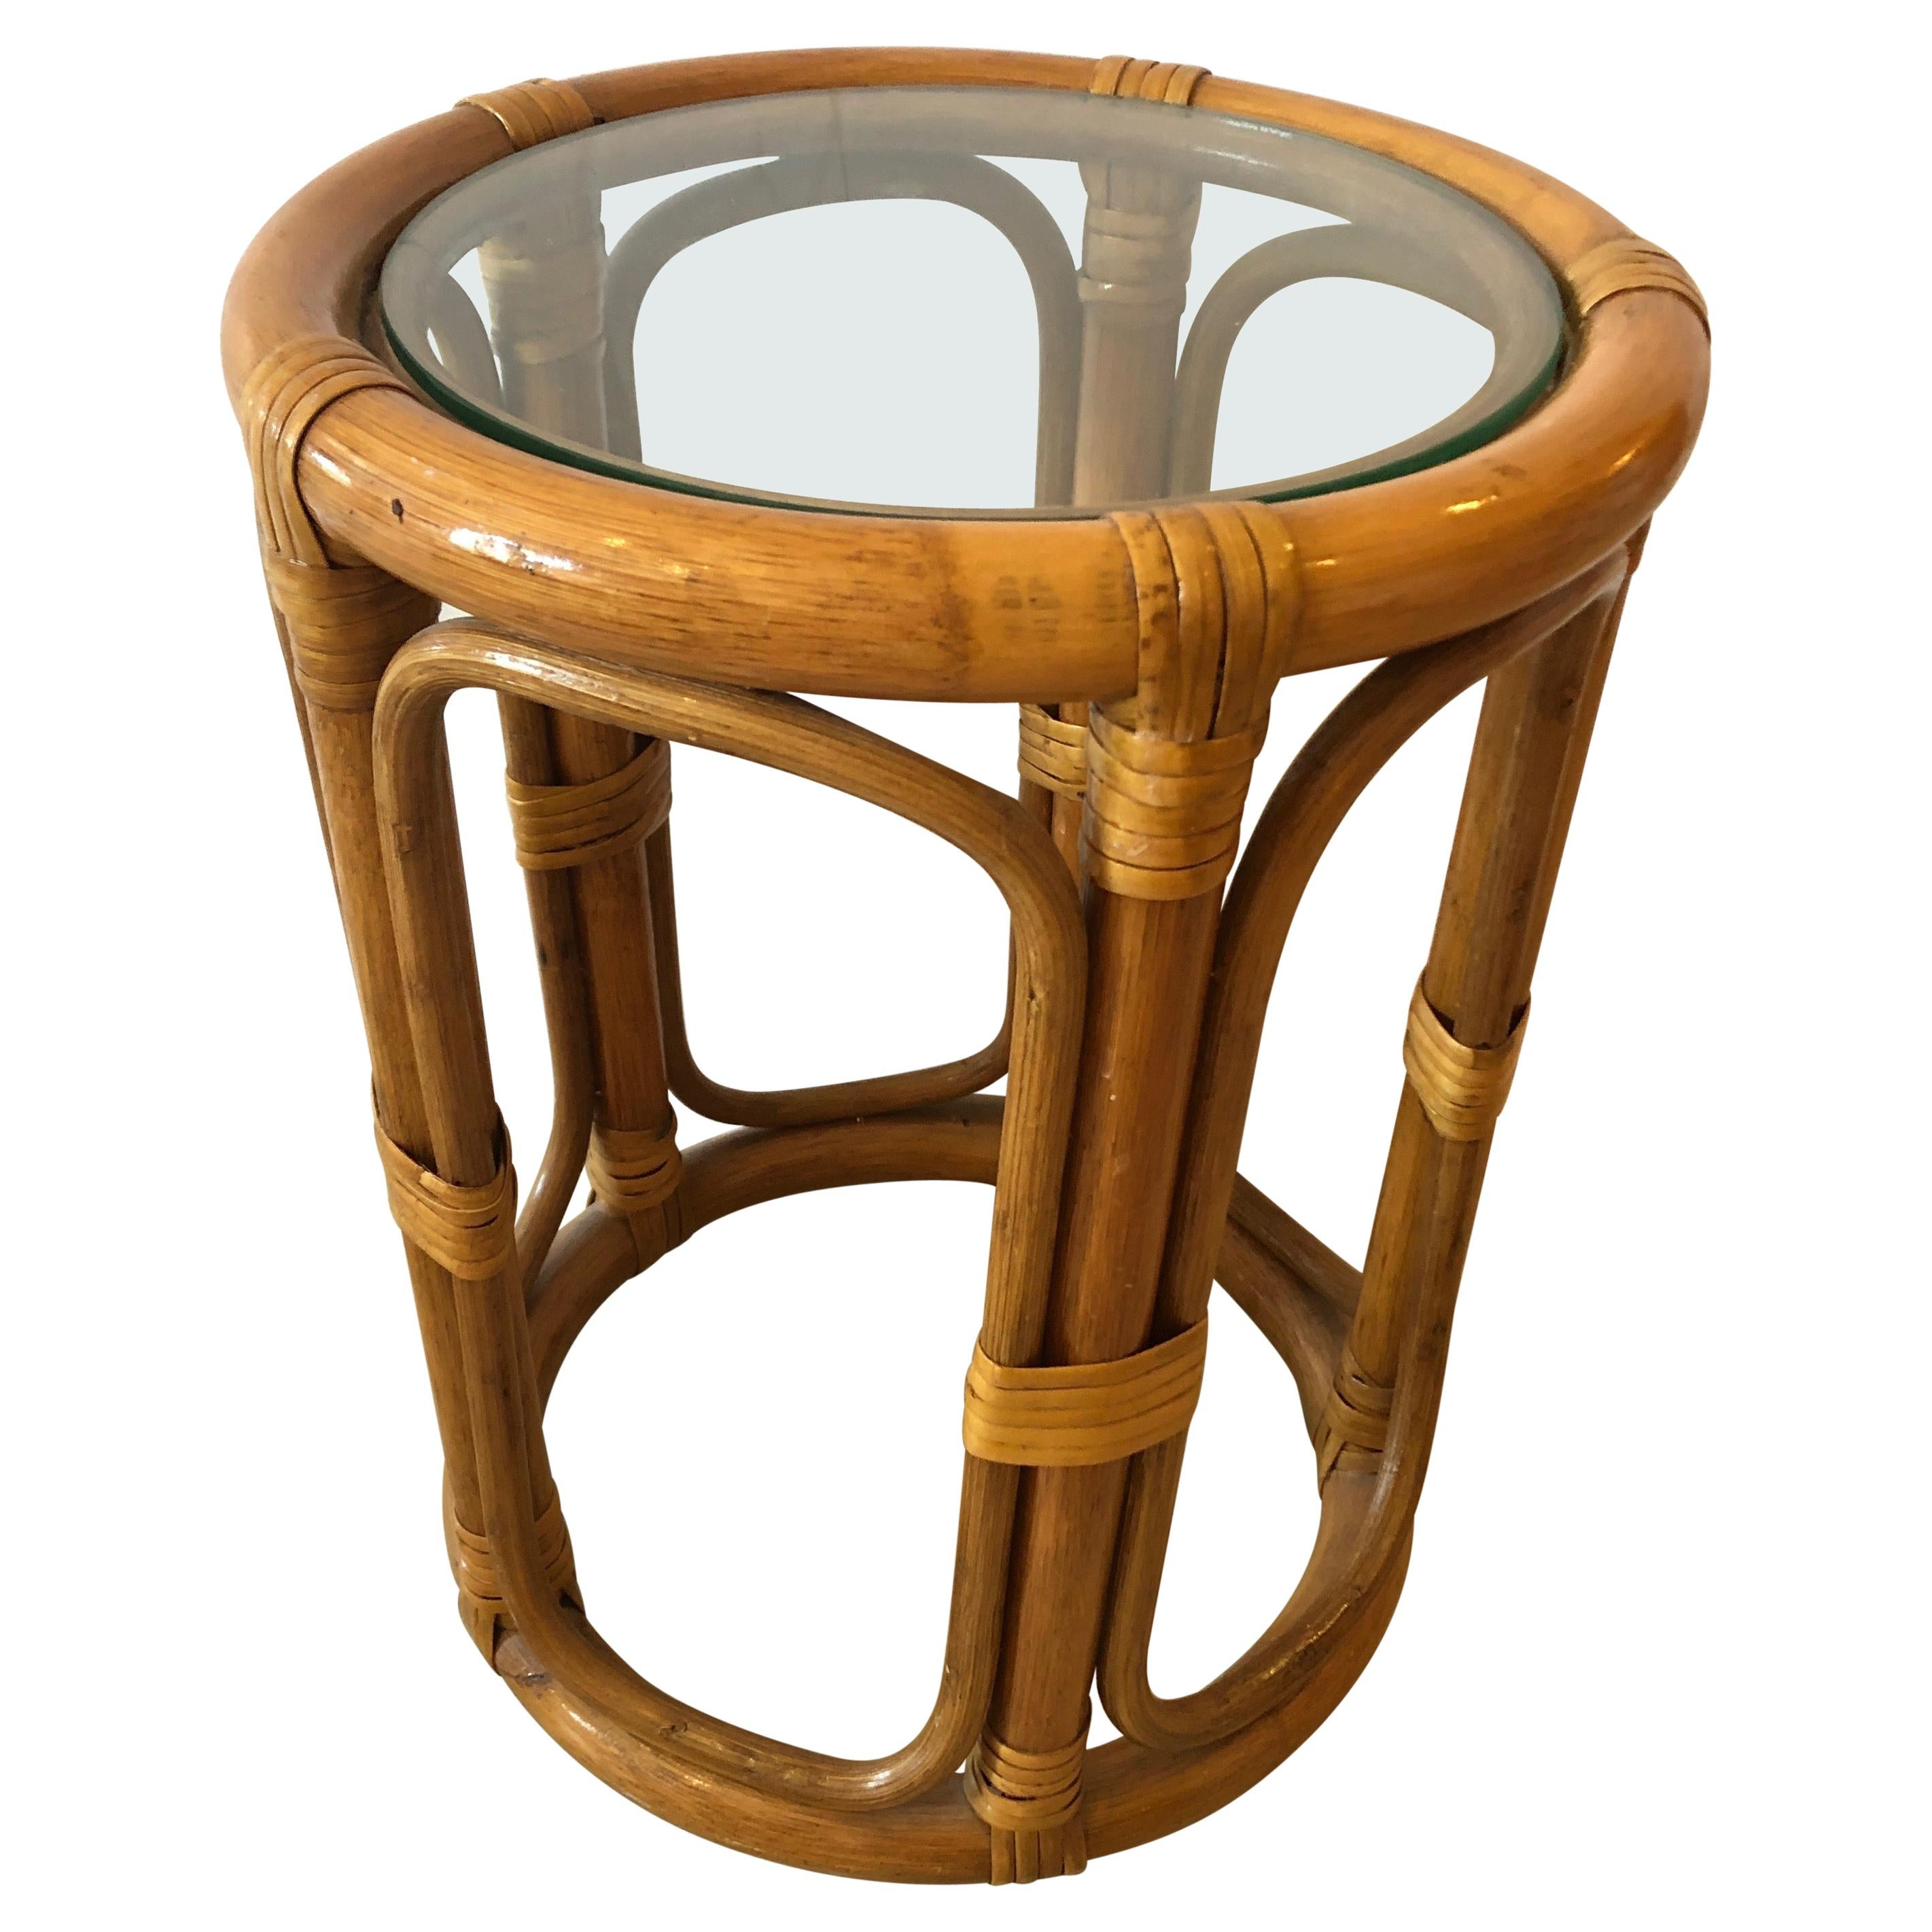 Adorable Chic Little Round Bamboo Rattan Drinks Table